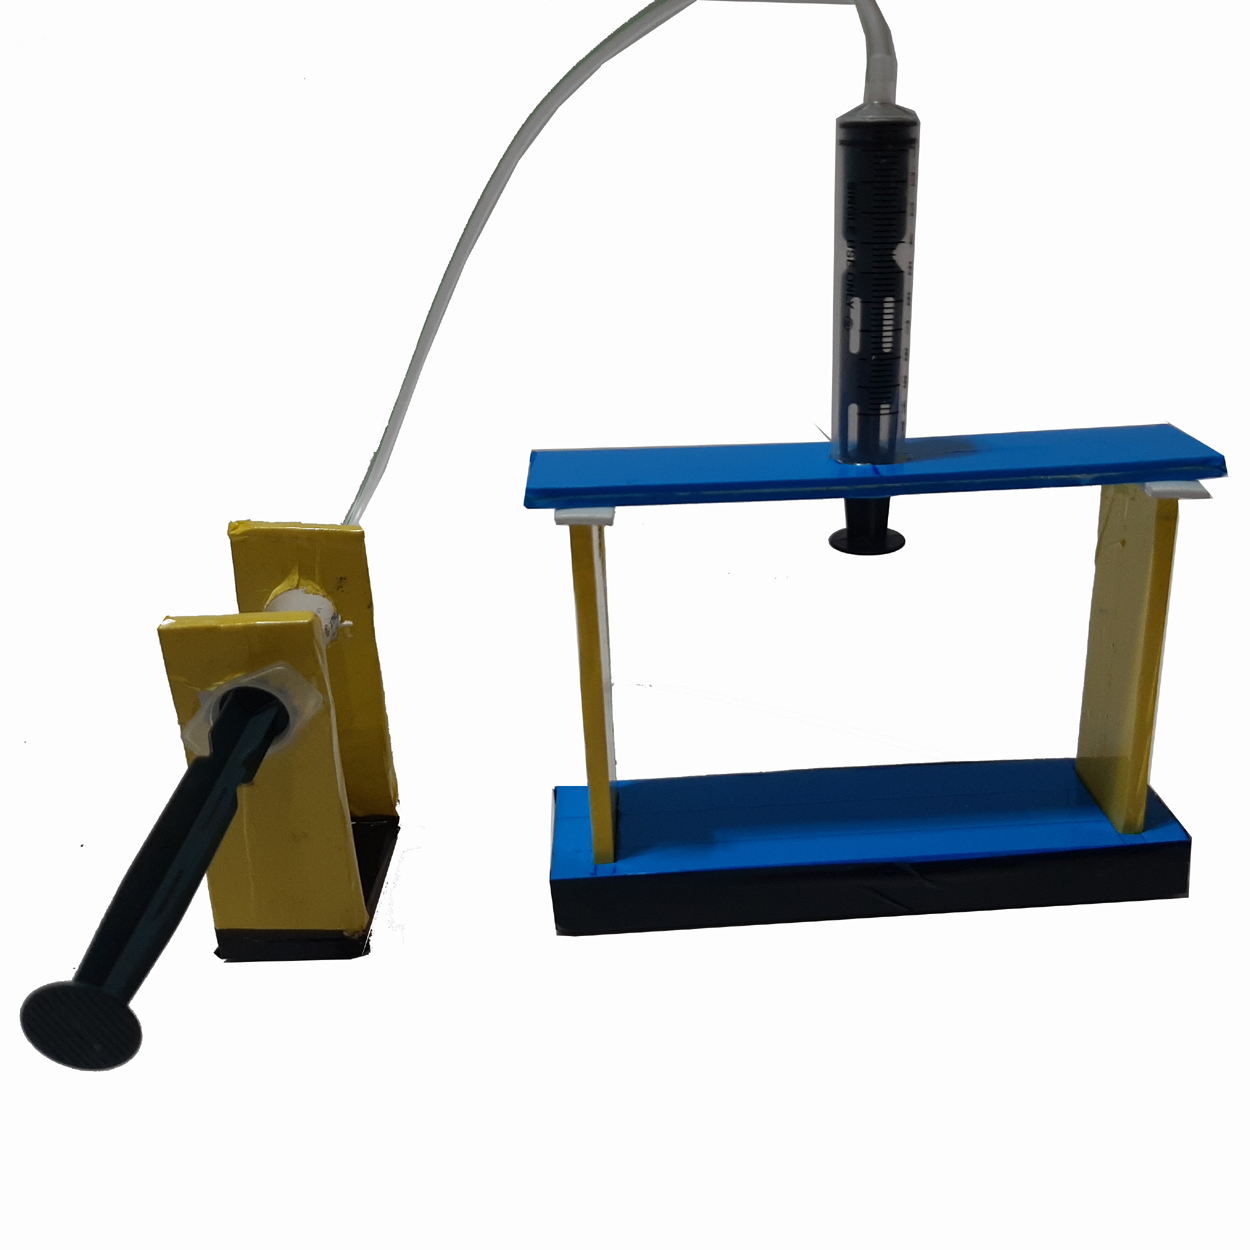 Hydraulic Press, Pascals Law DIY Project kit